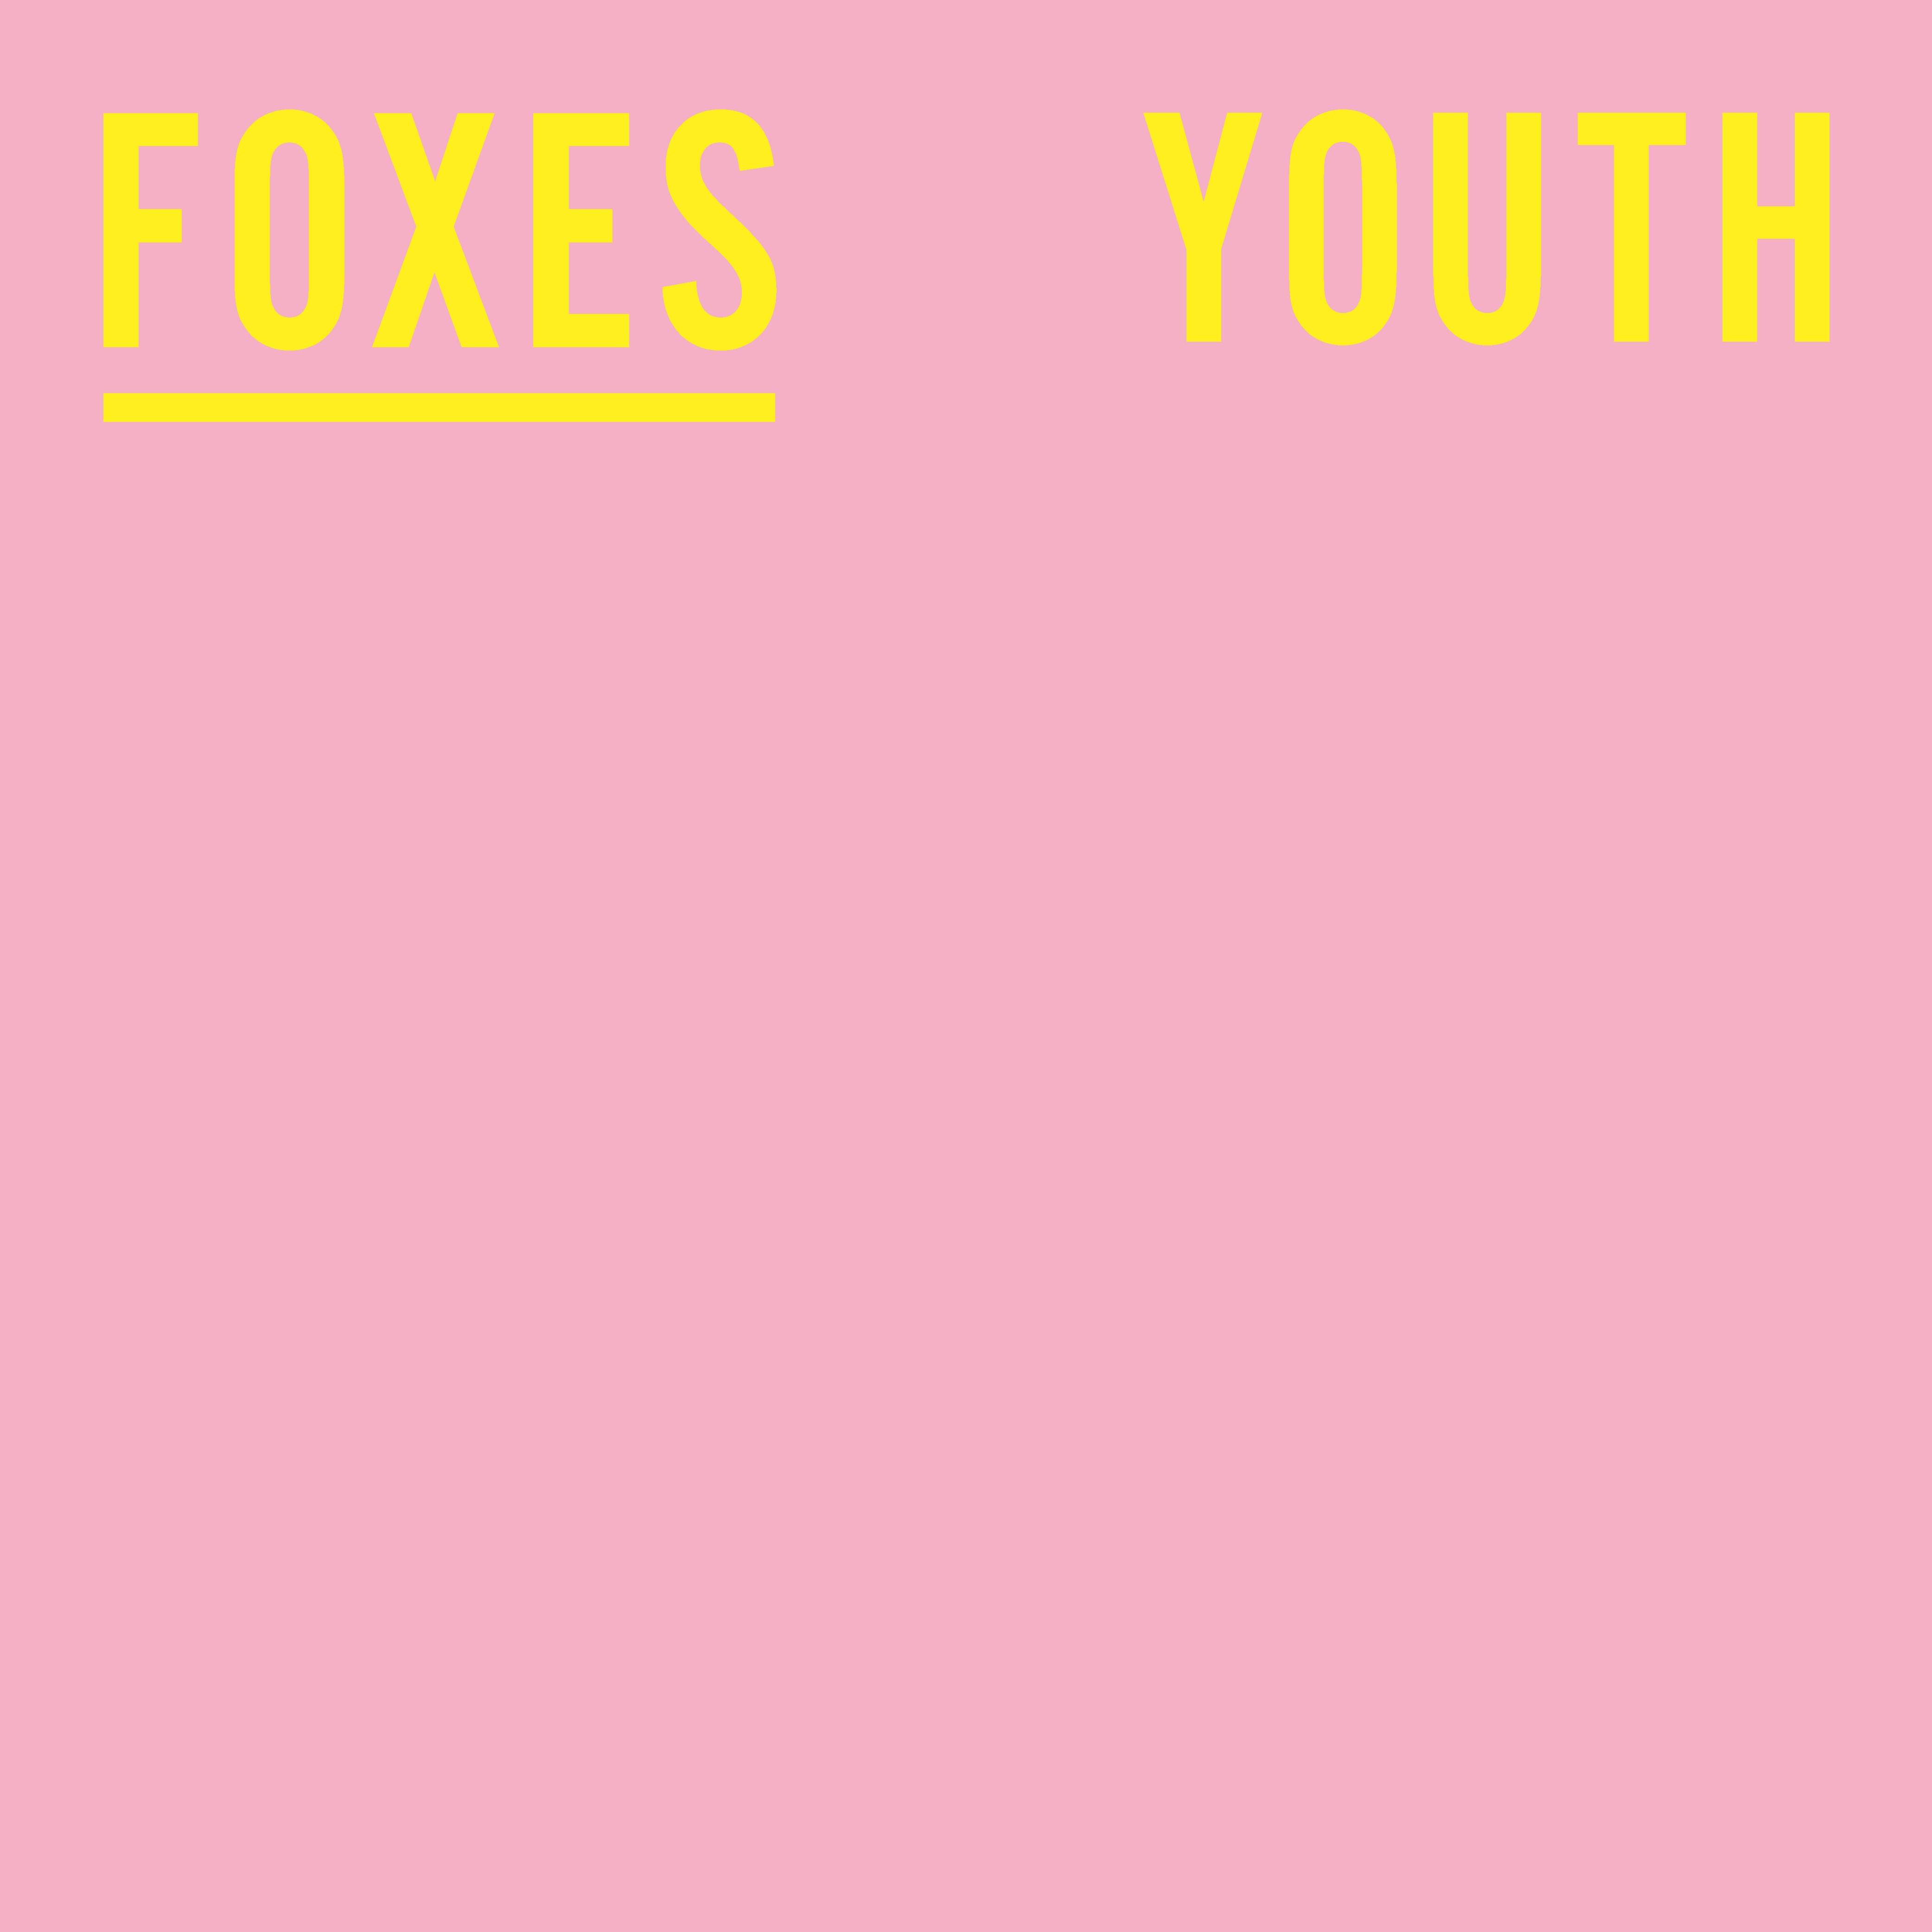 Foxes_Youth_Packshot-4